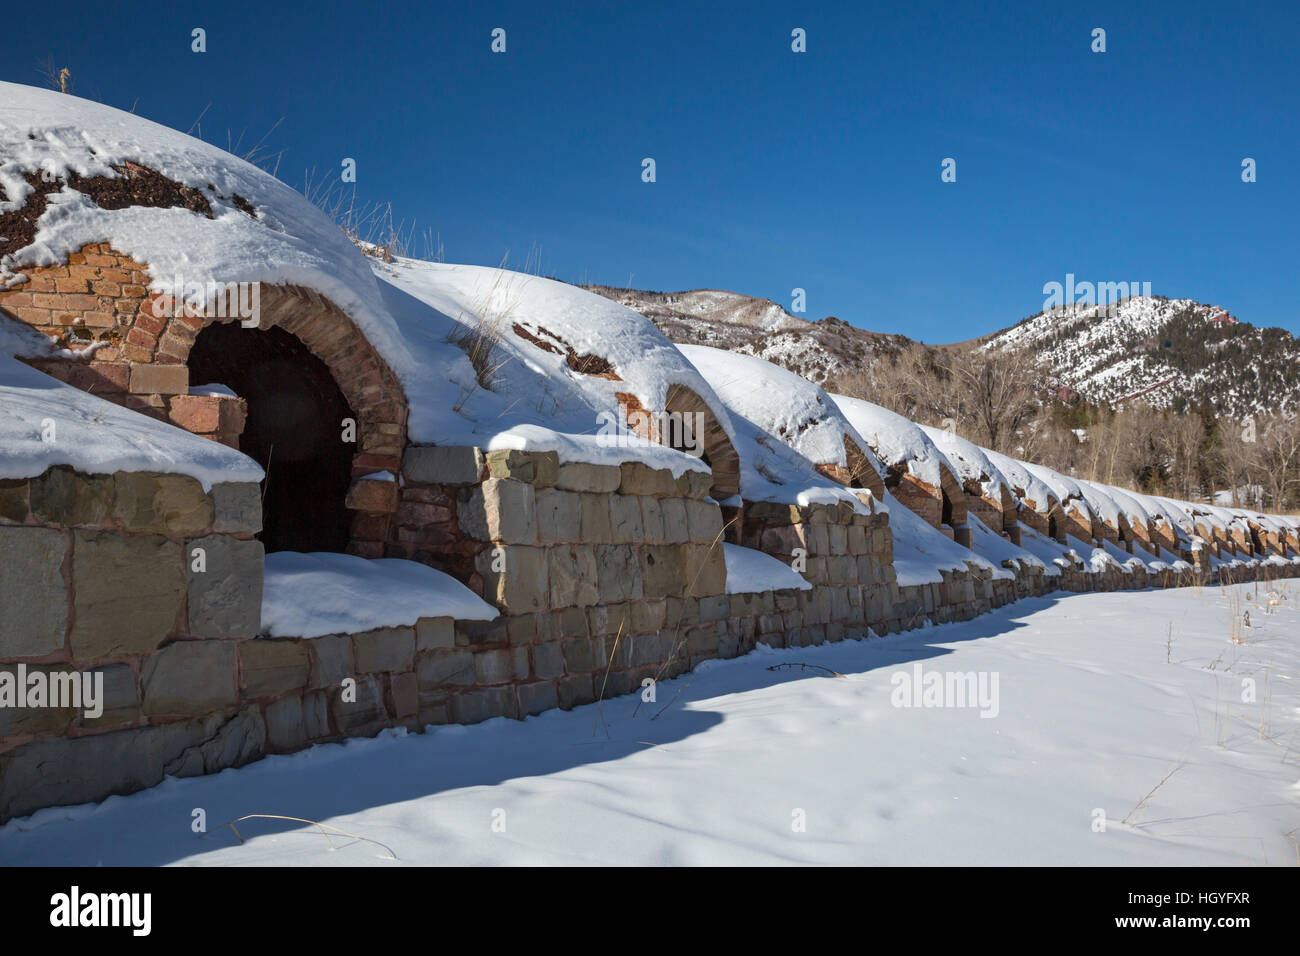 Redstone, Colorado - Coke ovens, built in the 1890s, which produced coke from coal mined nearby for the Colorado Fuel and Iron Company. Stock Photo